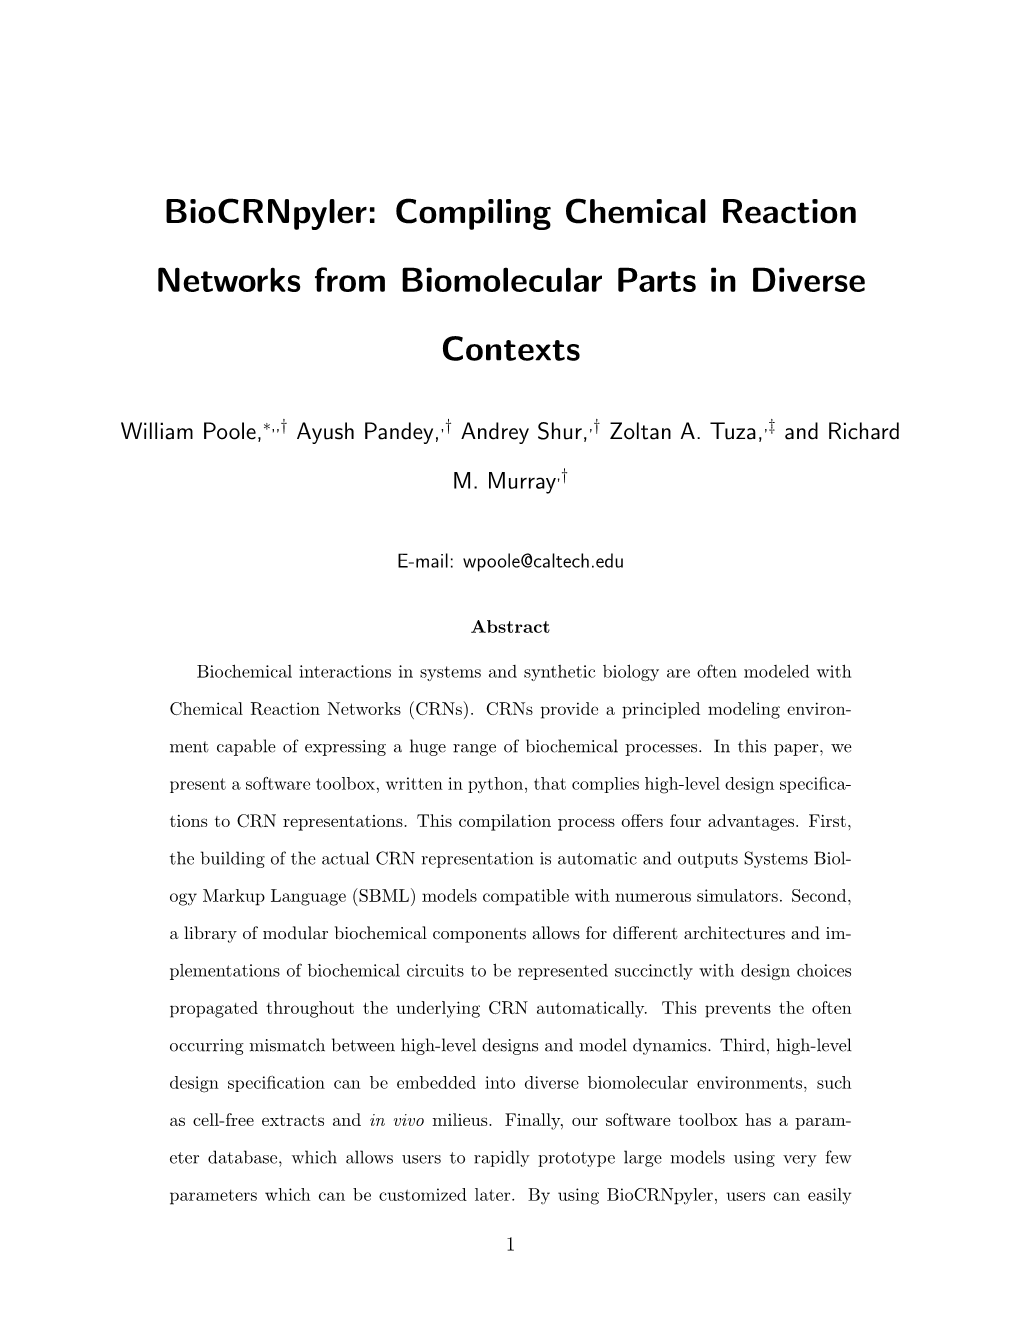 Biocrnpyler: Compiling Chemical Reaction Networks from Biomolecular Parts in Diverse Contexts